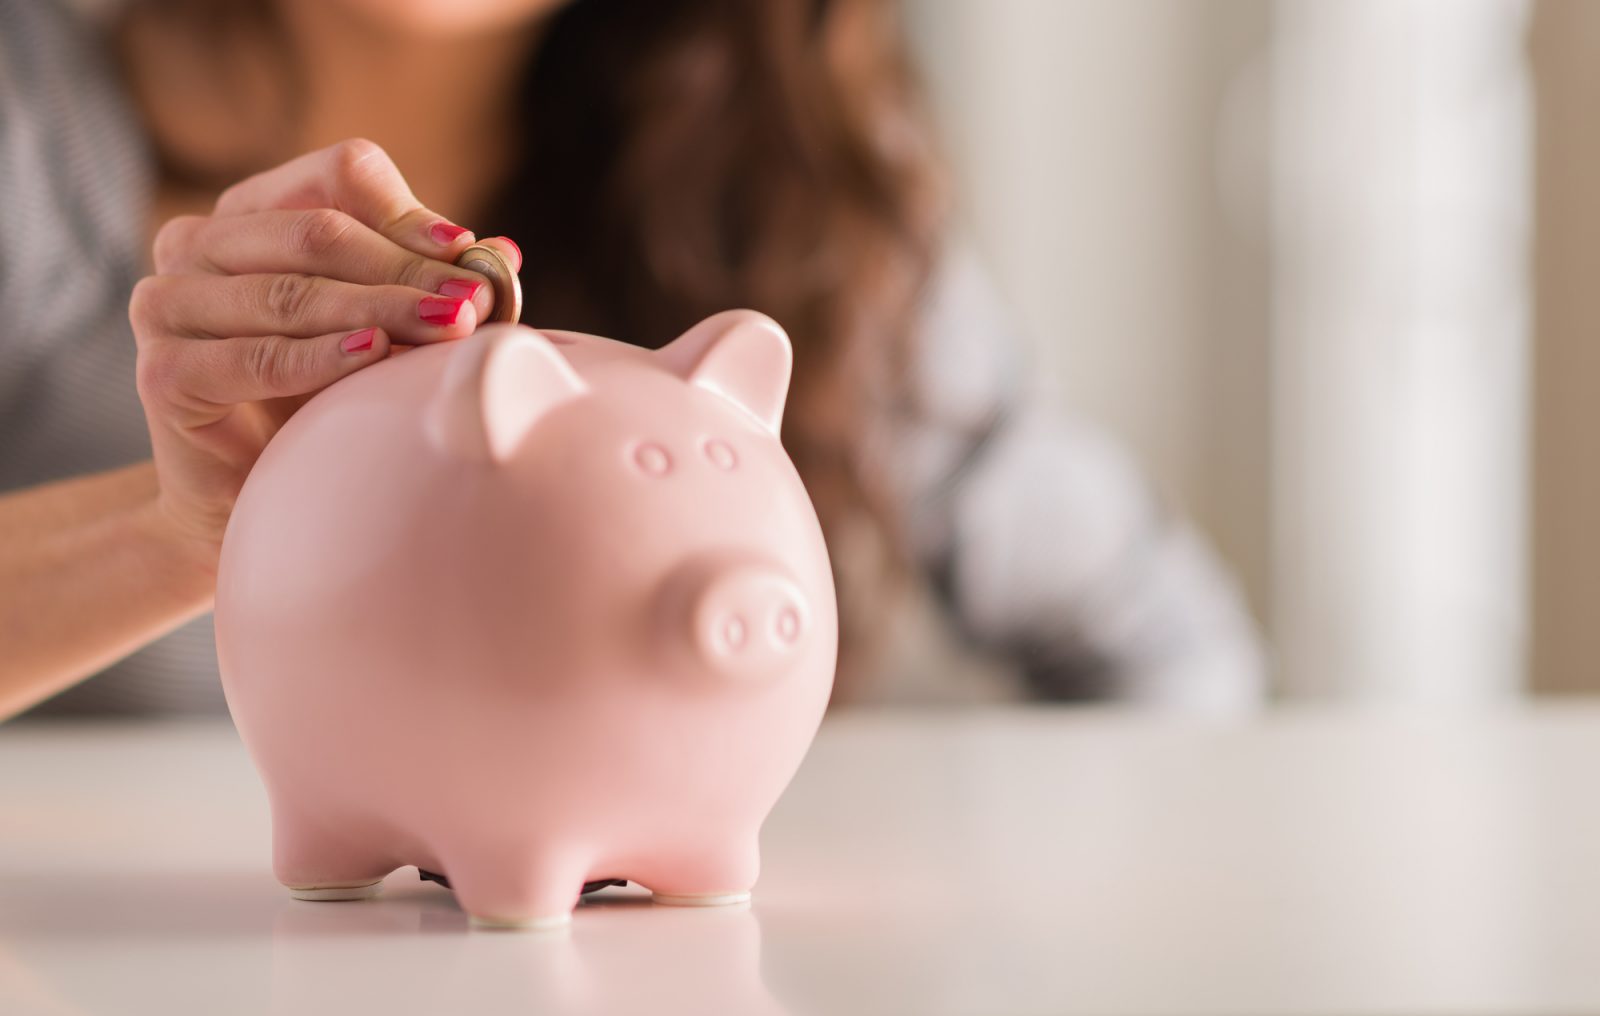 Practical tips to save money each month